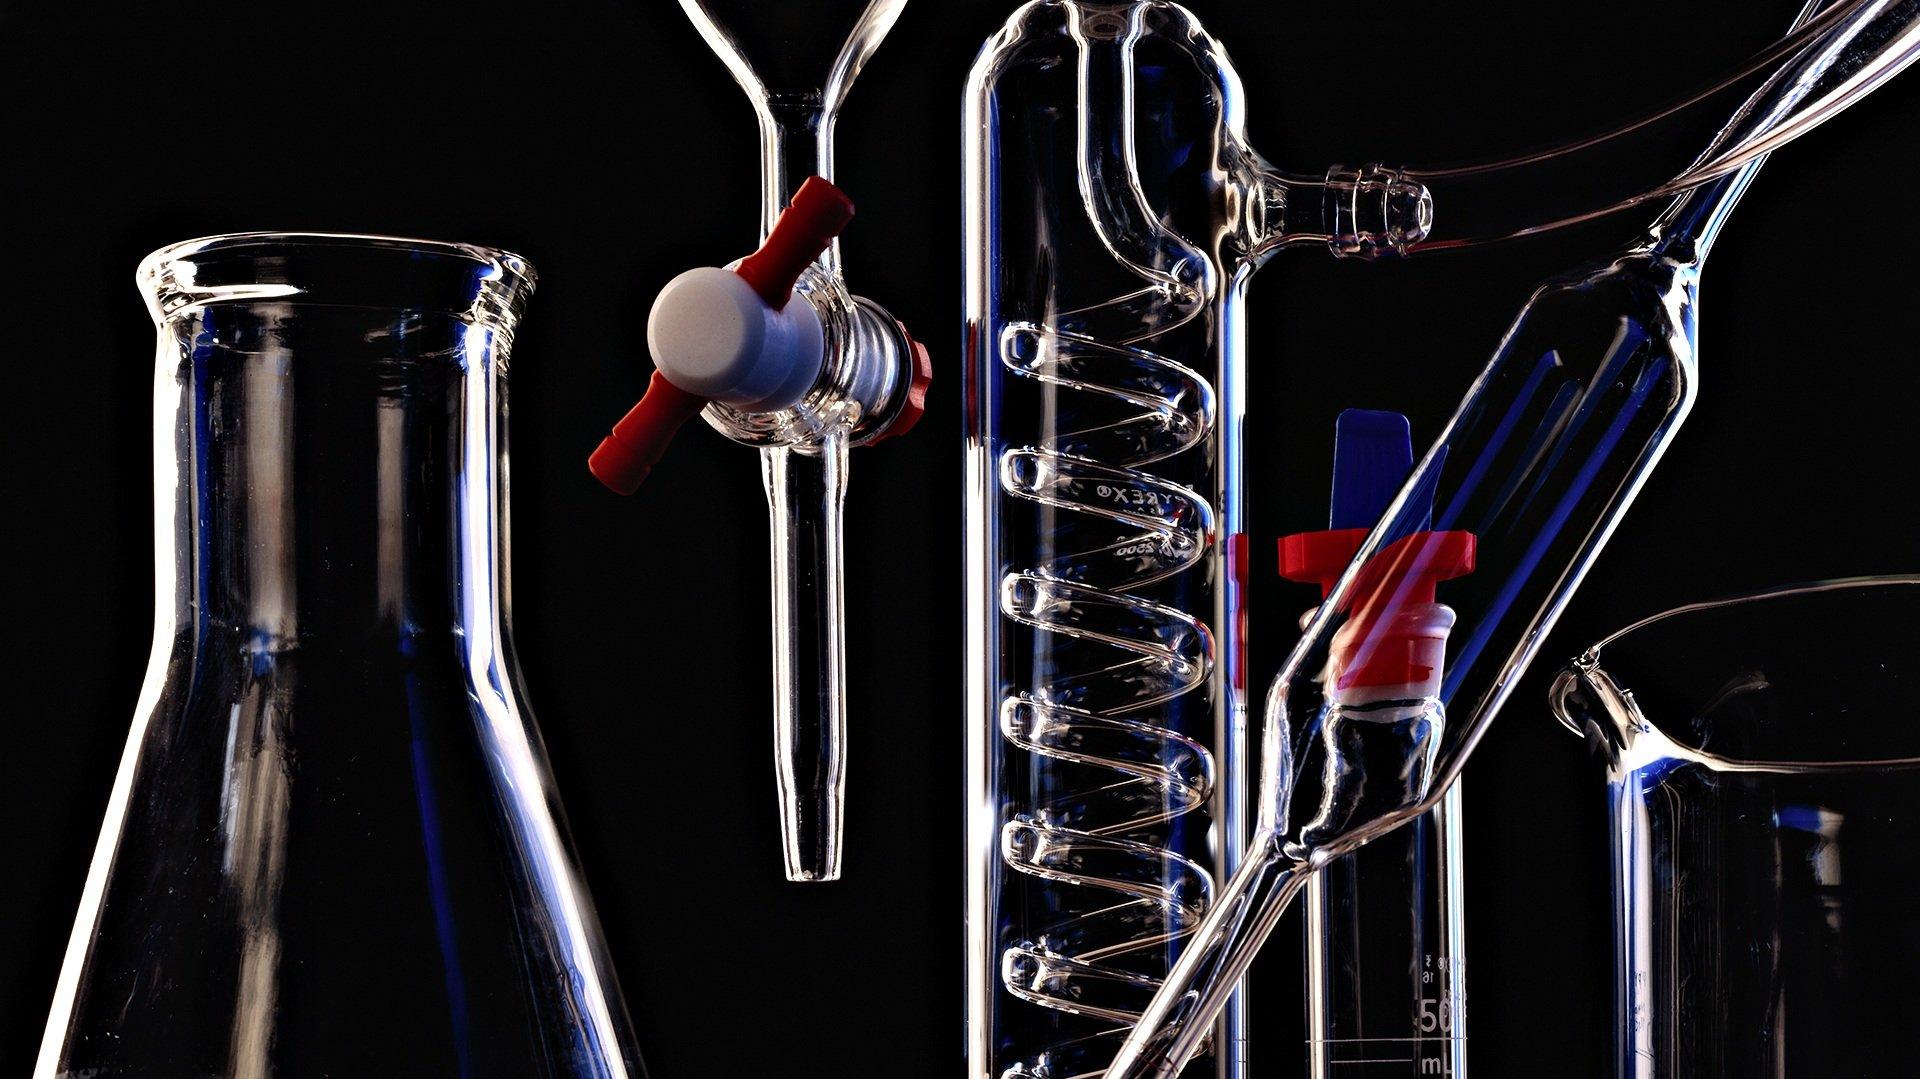 A Of Chemistry Guys D HD Wallpaper